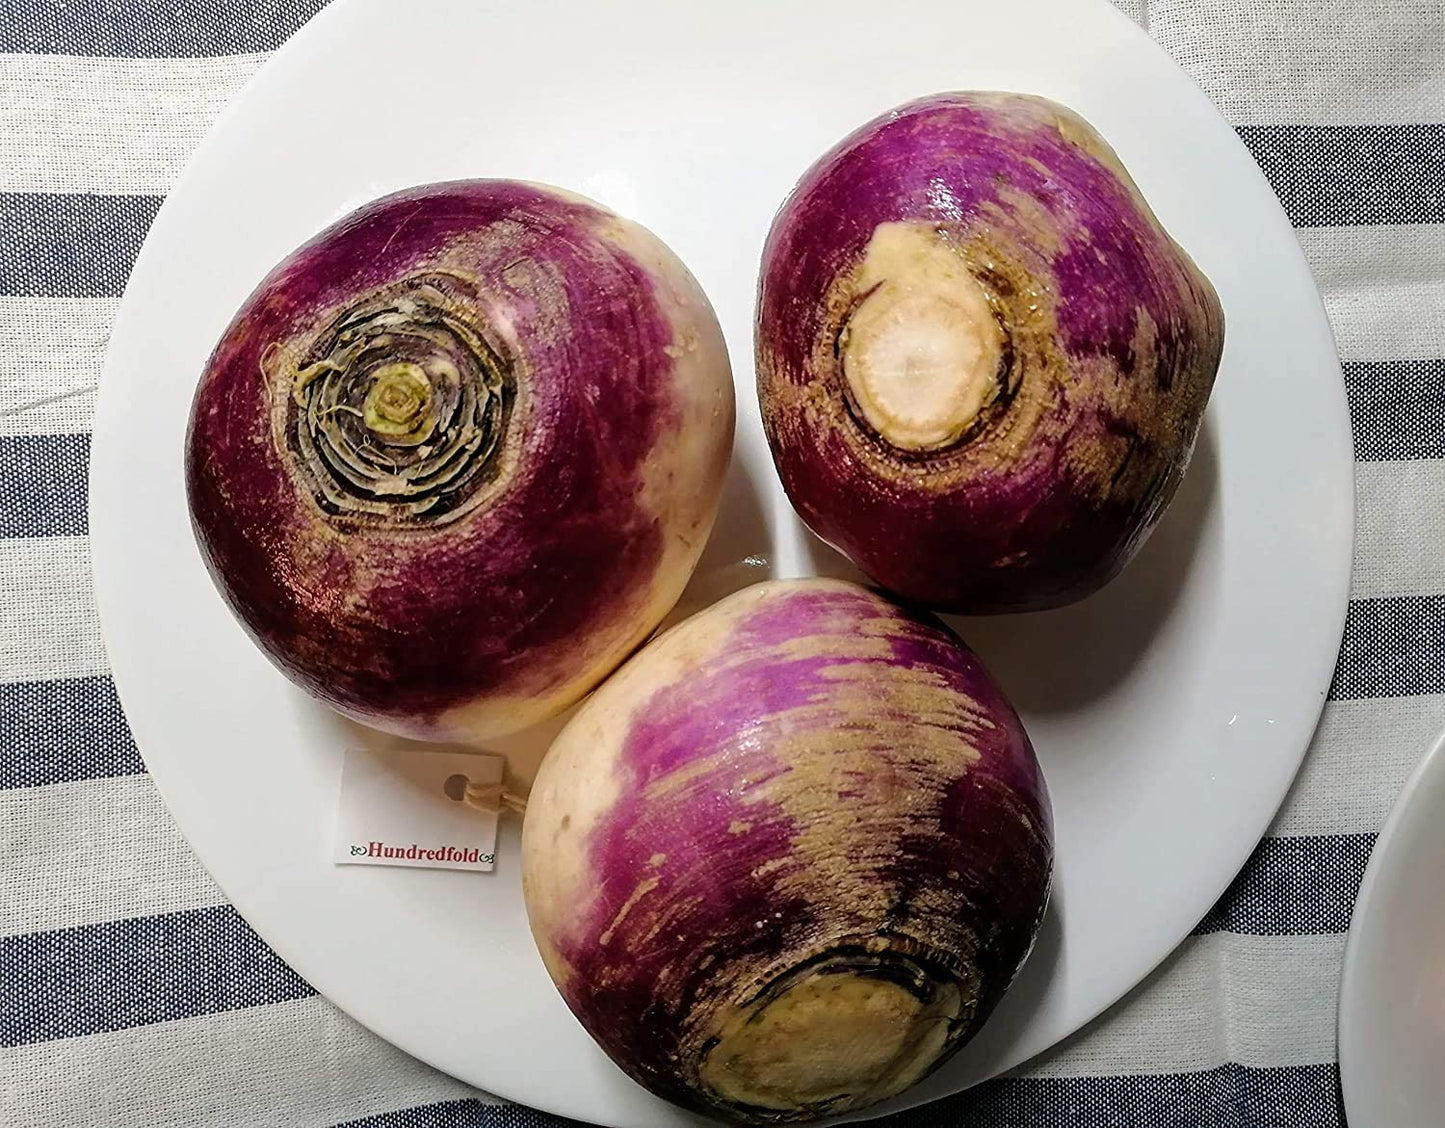 Purple Top White Globe Turnip 400 Vegetable Seeds for Planting - Brassica rapa Non-GMO Heirloom Grow-Your-Own Grow Your Own Survival Food, Fresh Seeds Can Be Stored for 4 Years, Excellent for Microgreen